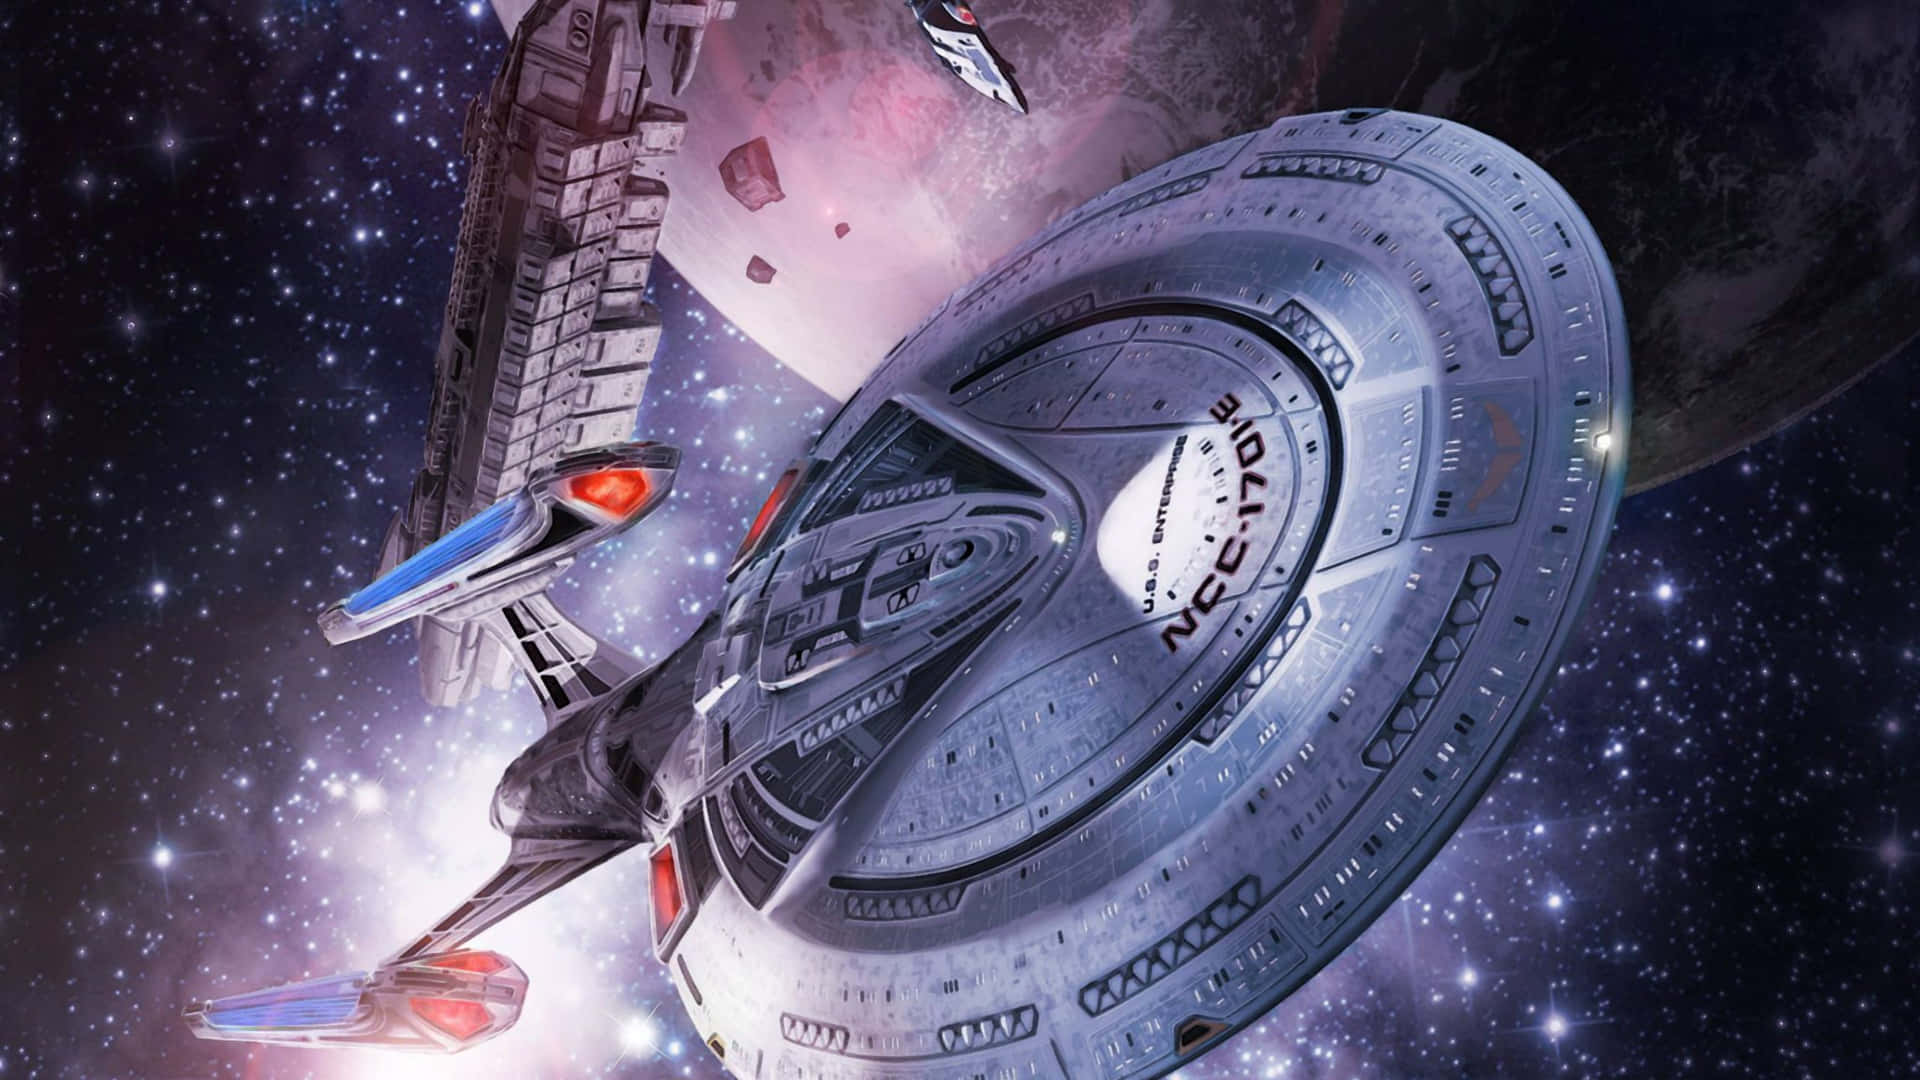 The U.S.S. Enterprise, captained by Jonathan Archer, boldly goes where no man has gone before Wallpaper